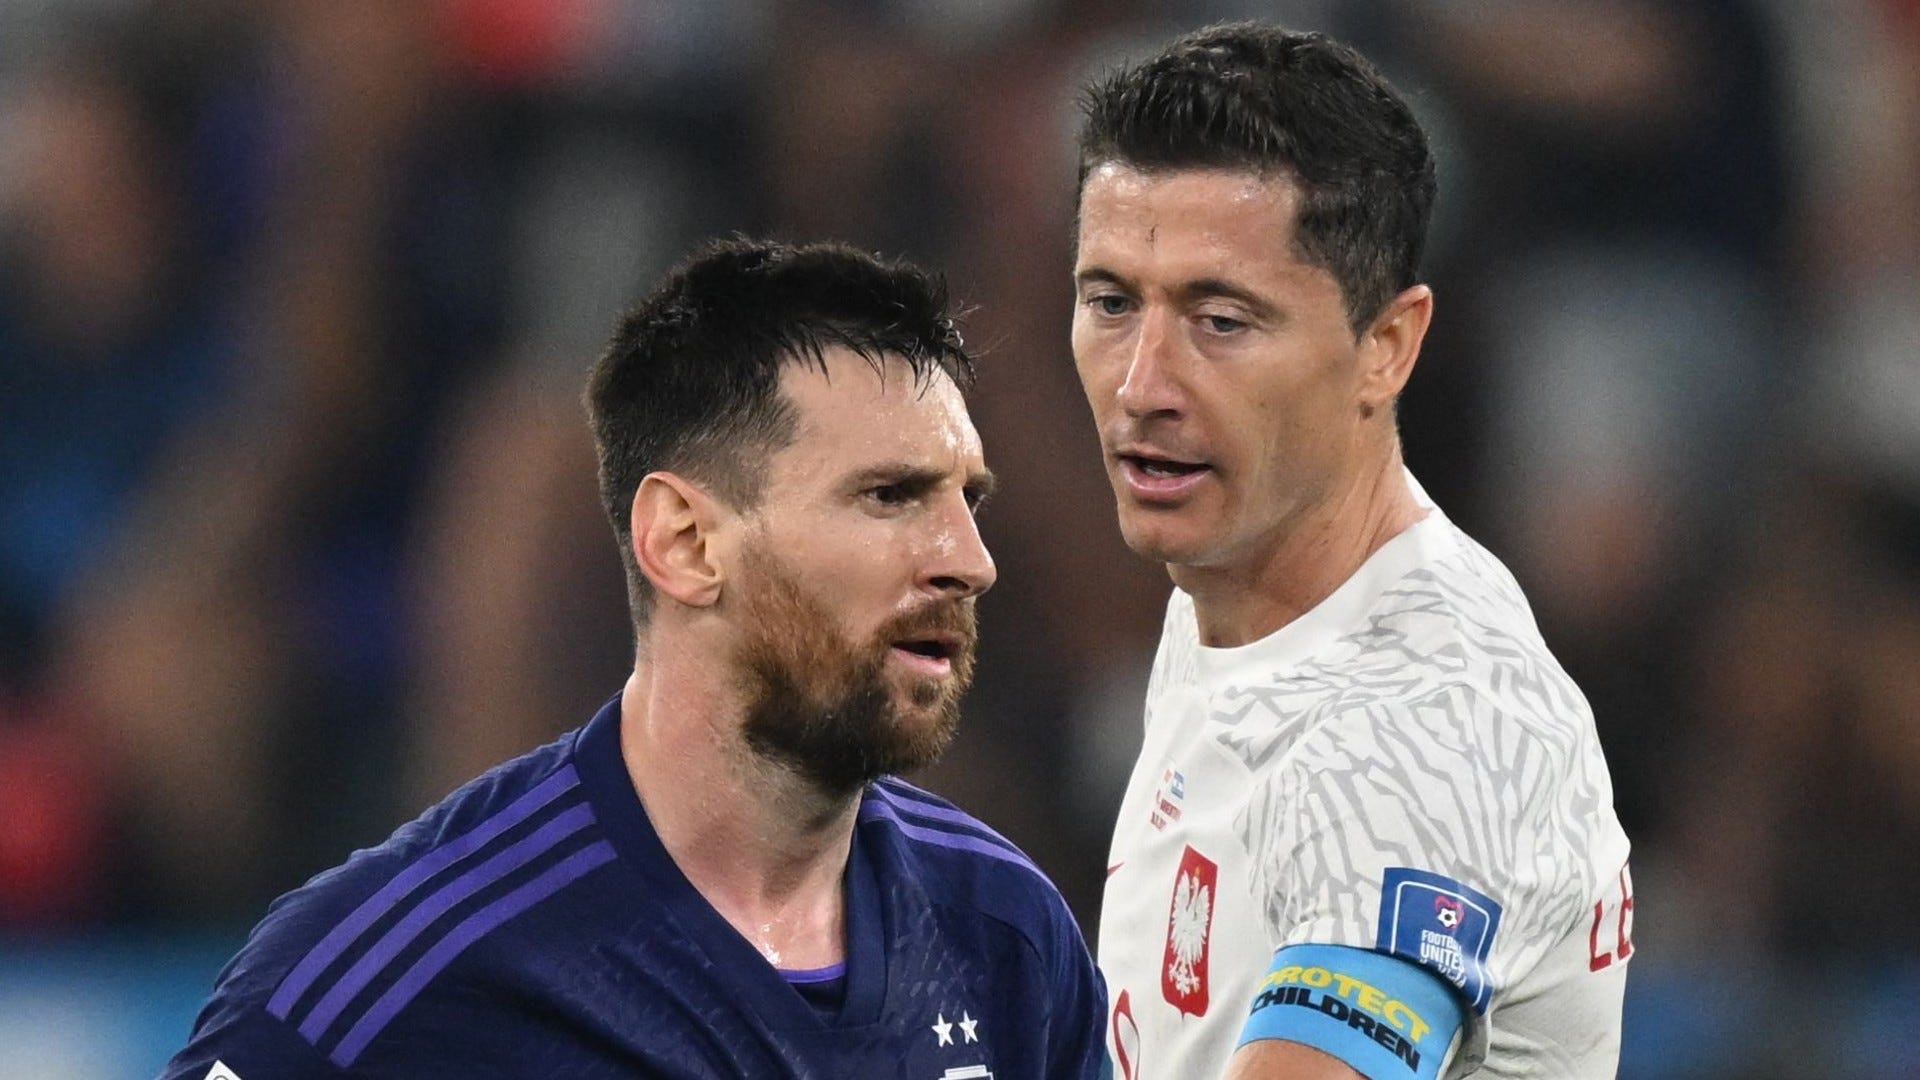 “I was upset”: Statements from ex-Bayern star Robert Lewandowski “really bothered” Lionel Messi |  Goal.com Germany